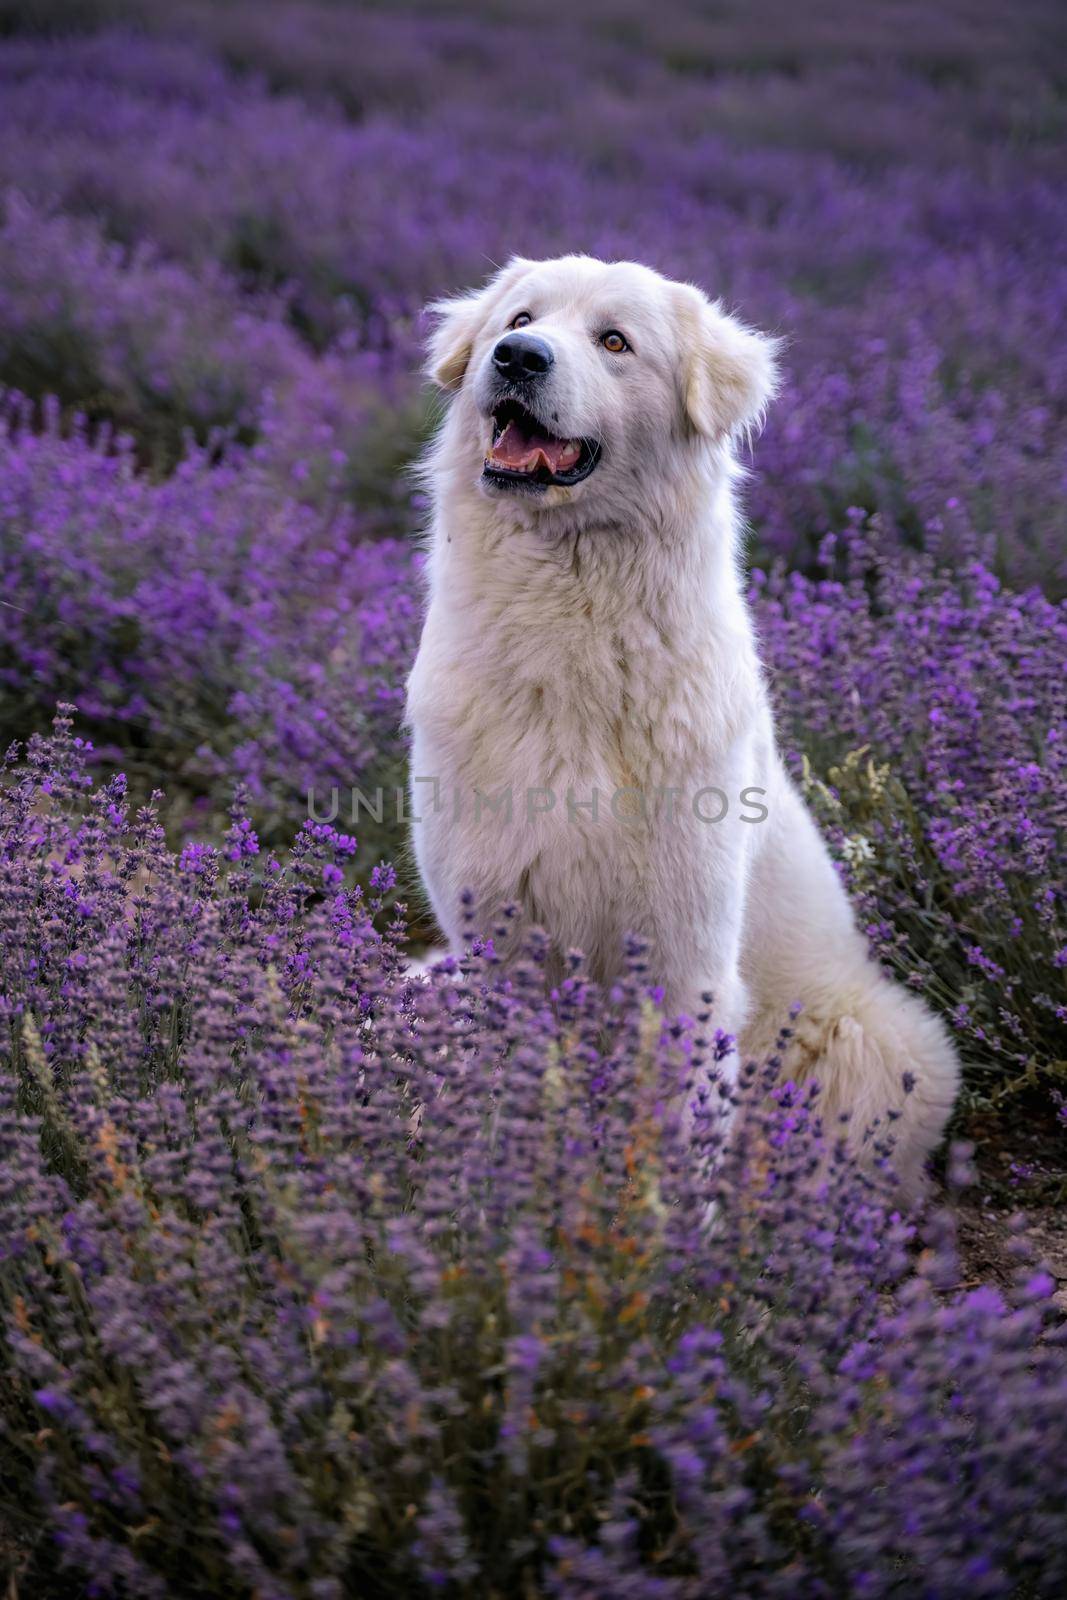 Large white dog in a lavender field in Provence, France.